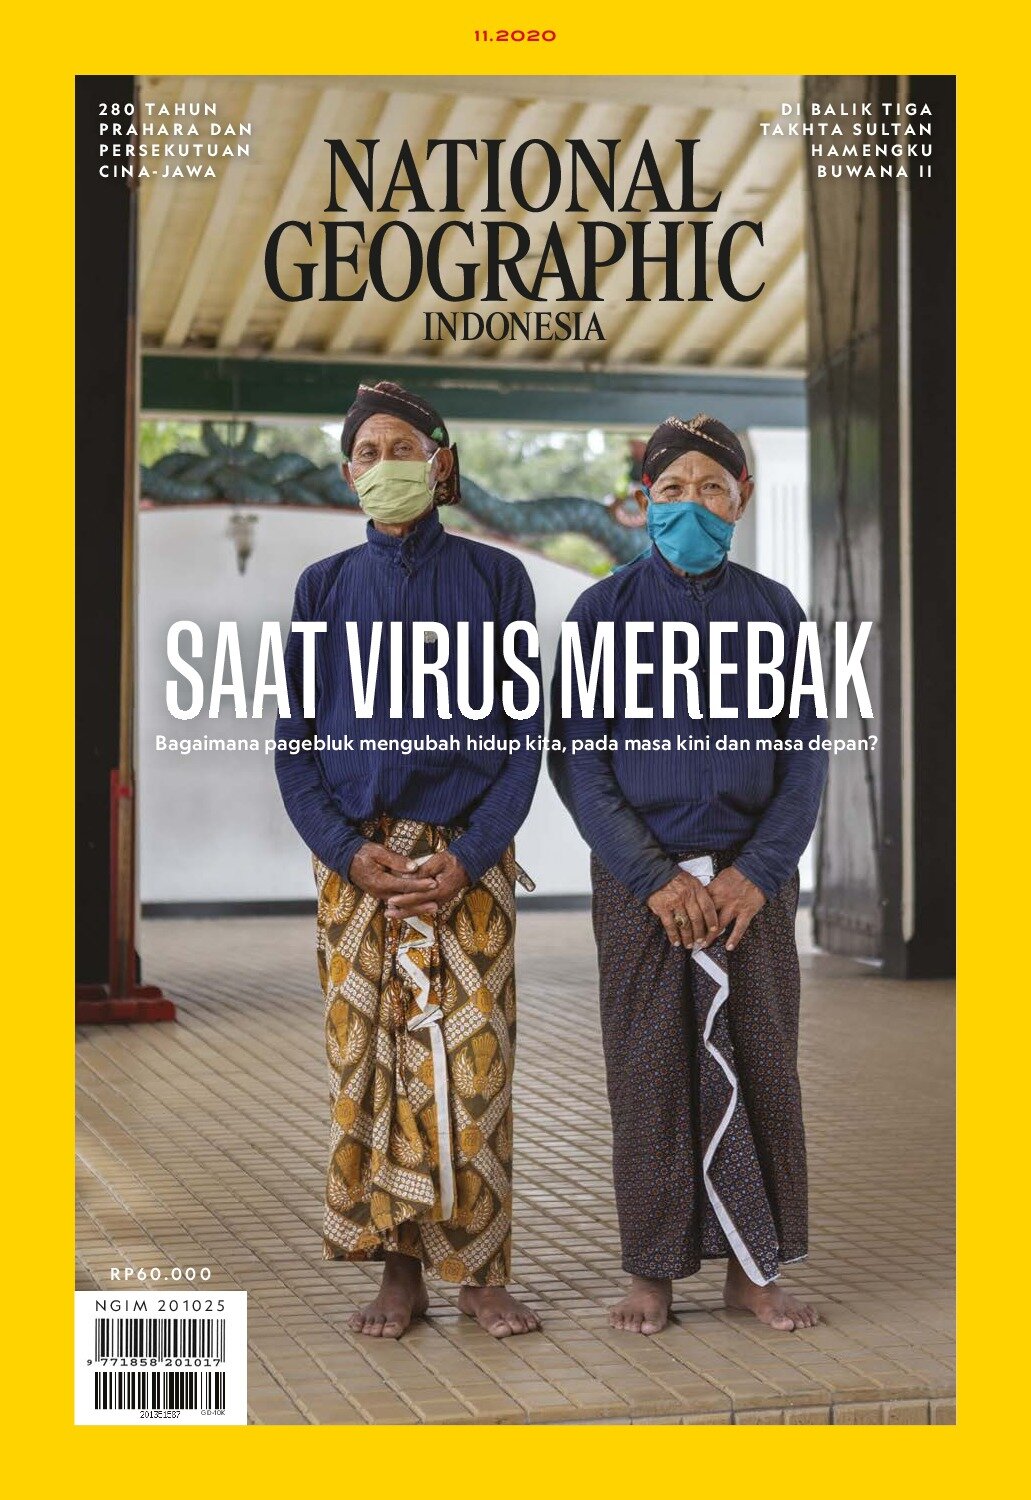  COVID-19 Cover Page in National Geographic Indonesia , November 2020 